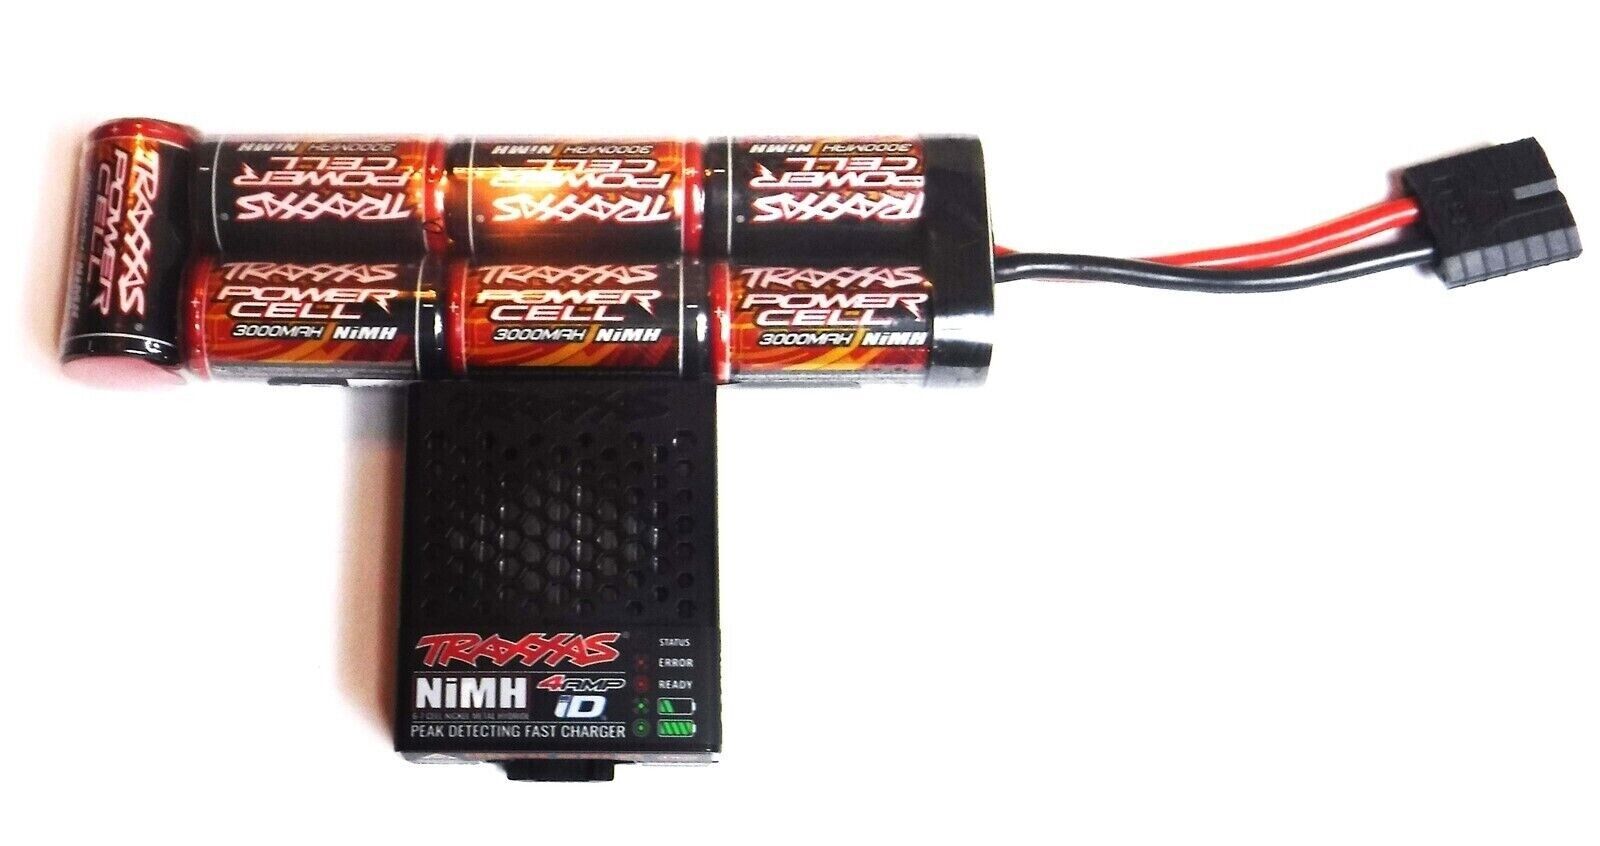 Traxxas Rustler XL-5 2WD 3000 MAH NiMH Battery and Charger - $59.95